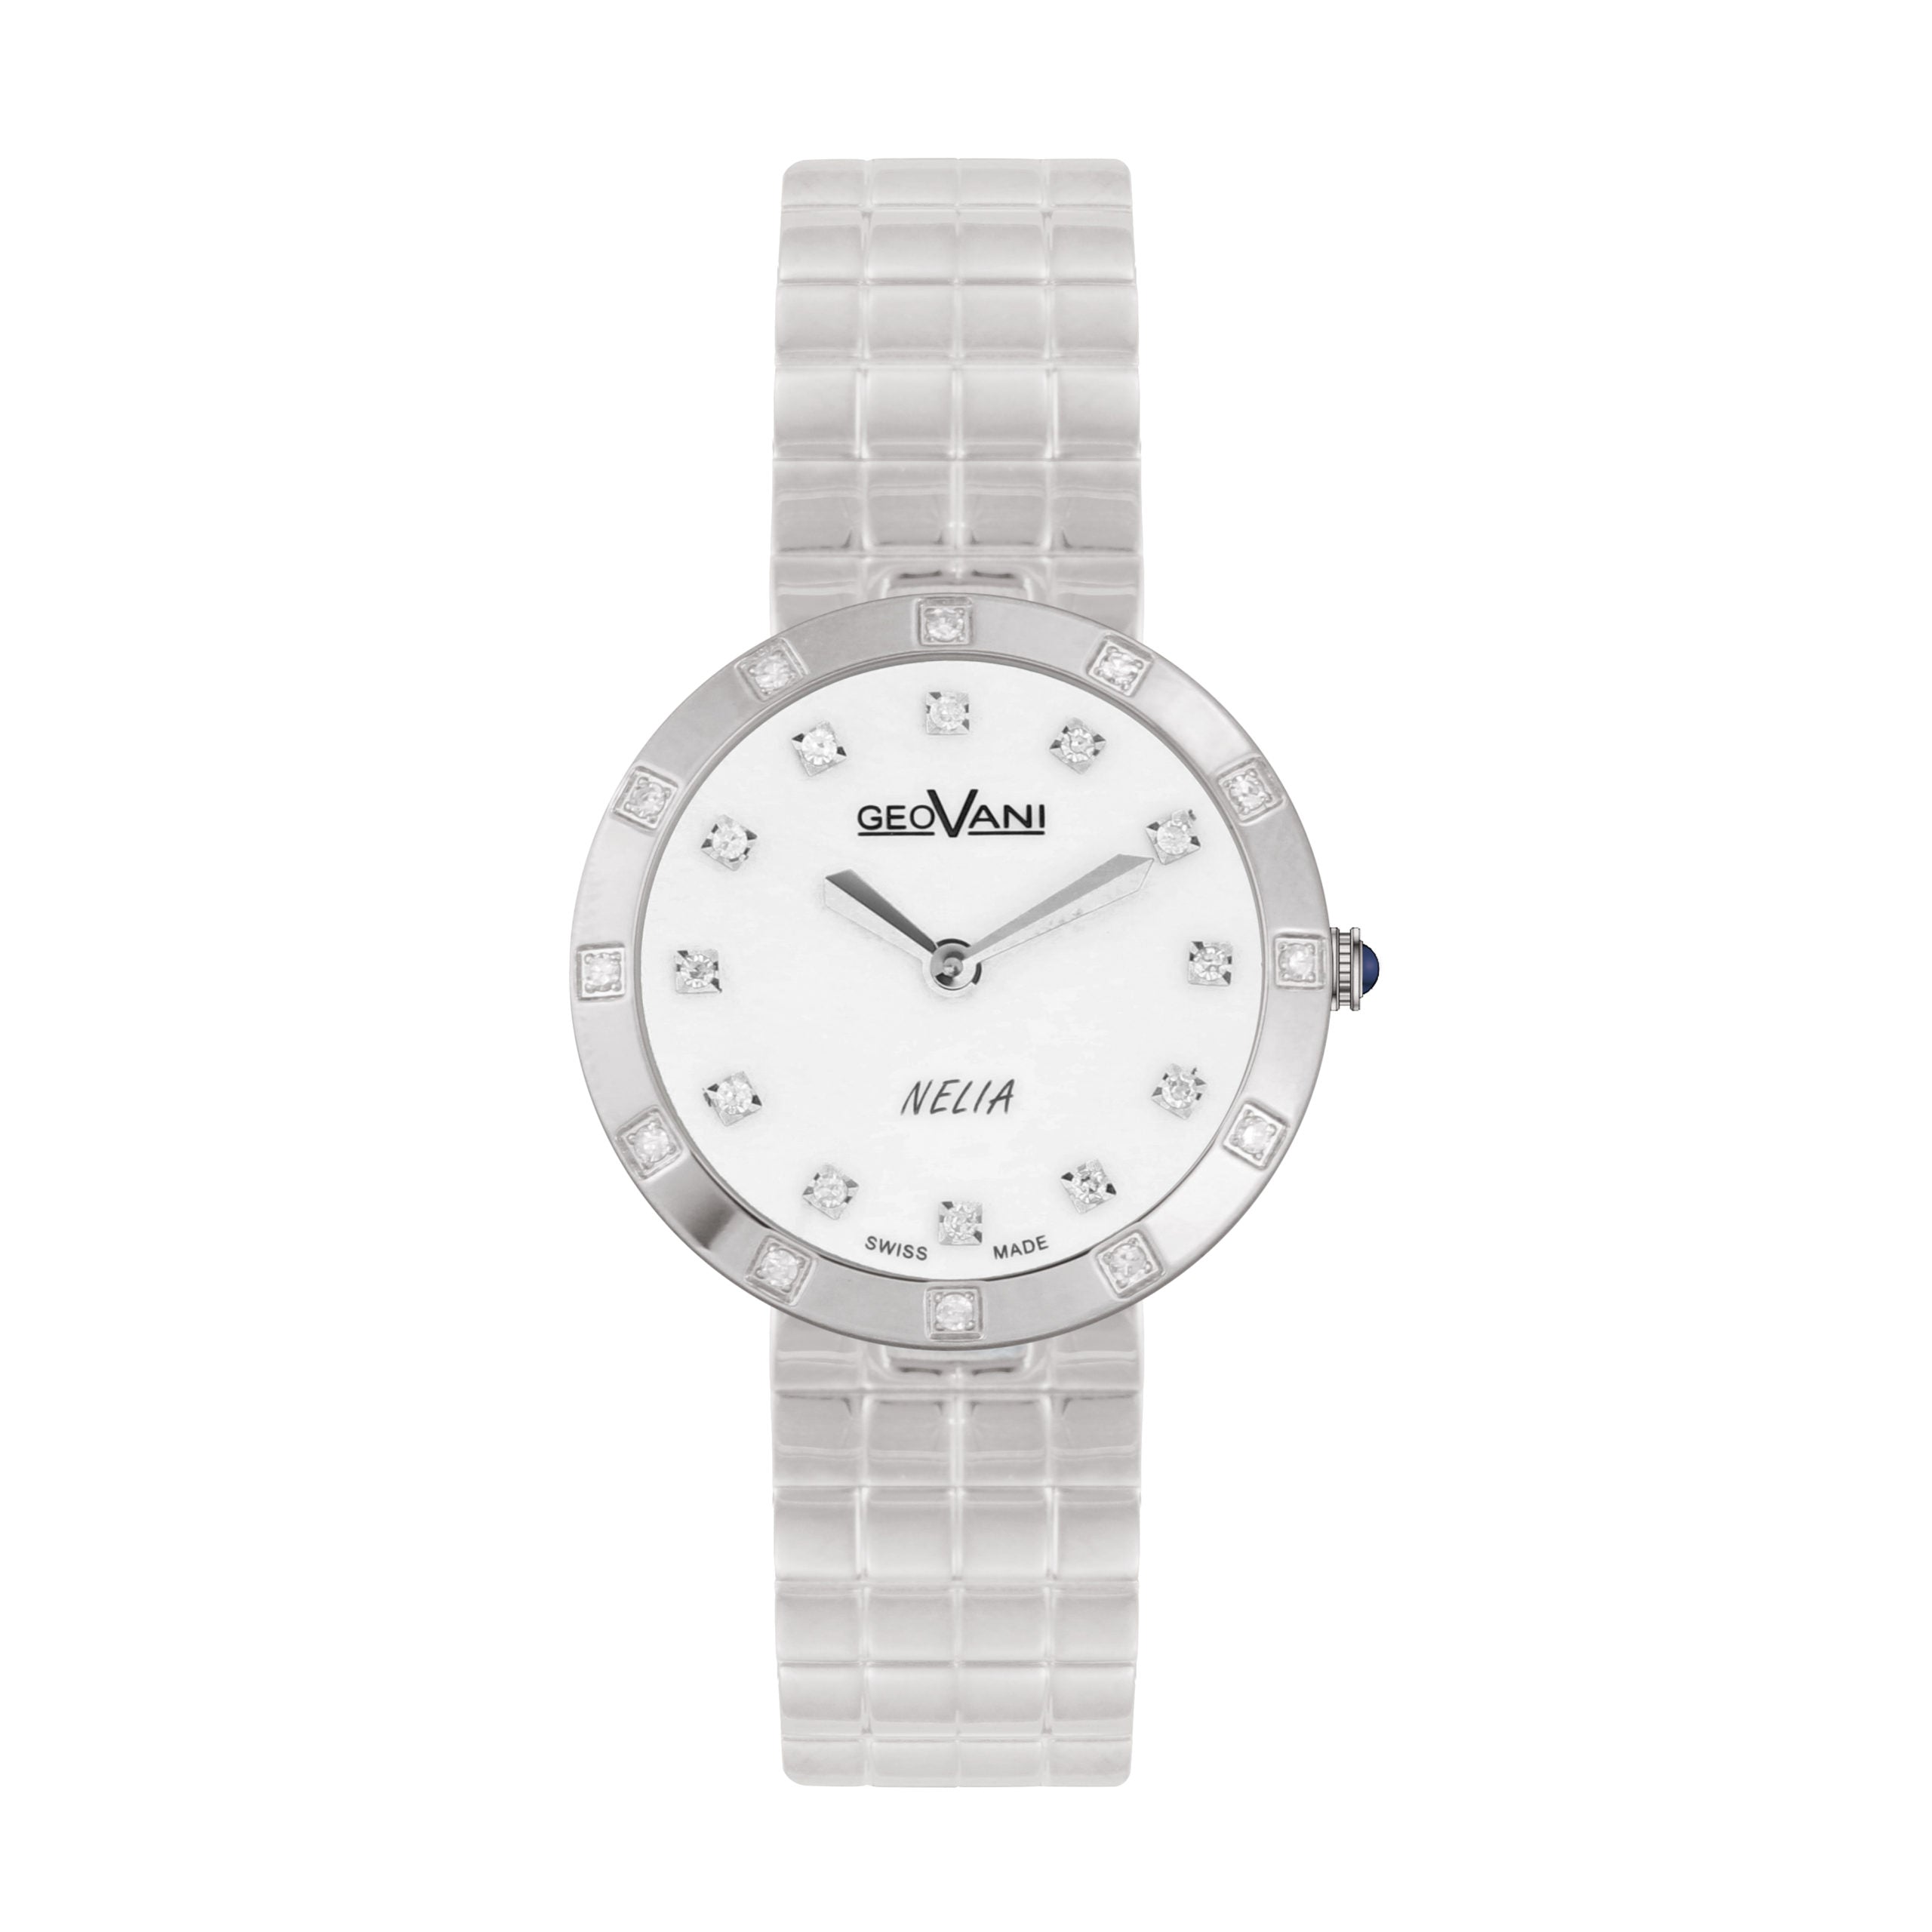 Giovanni Women's Swiss Quartz Watch with Pearly White Dial - GEO-0031